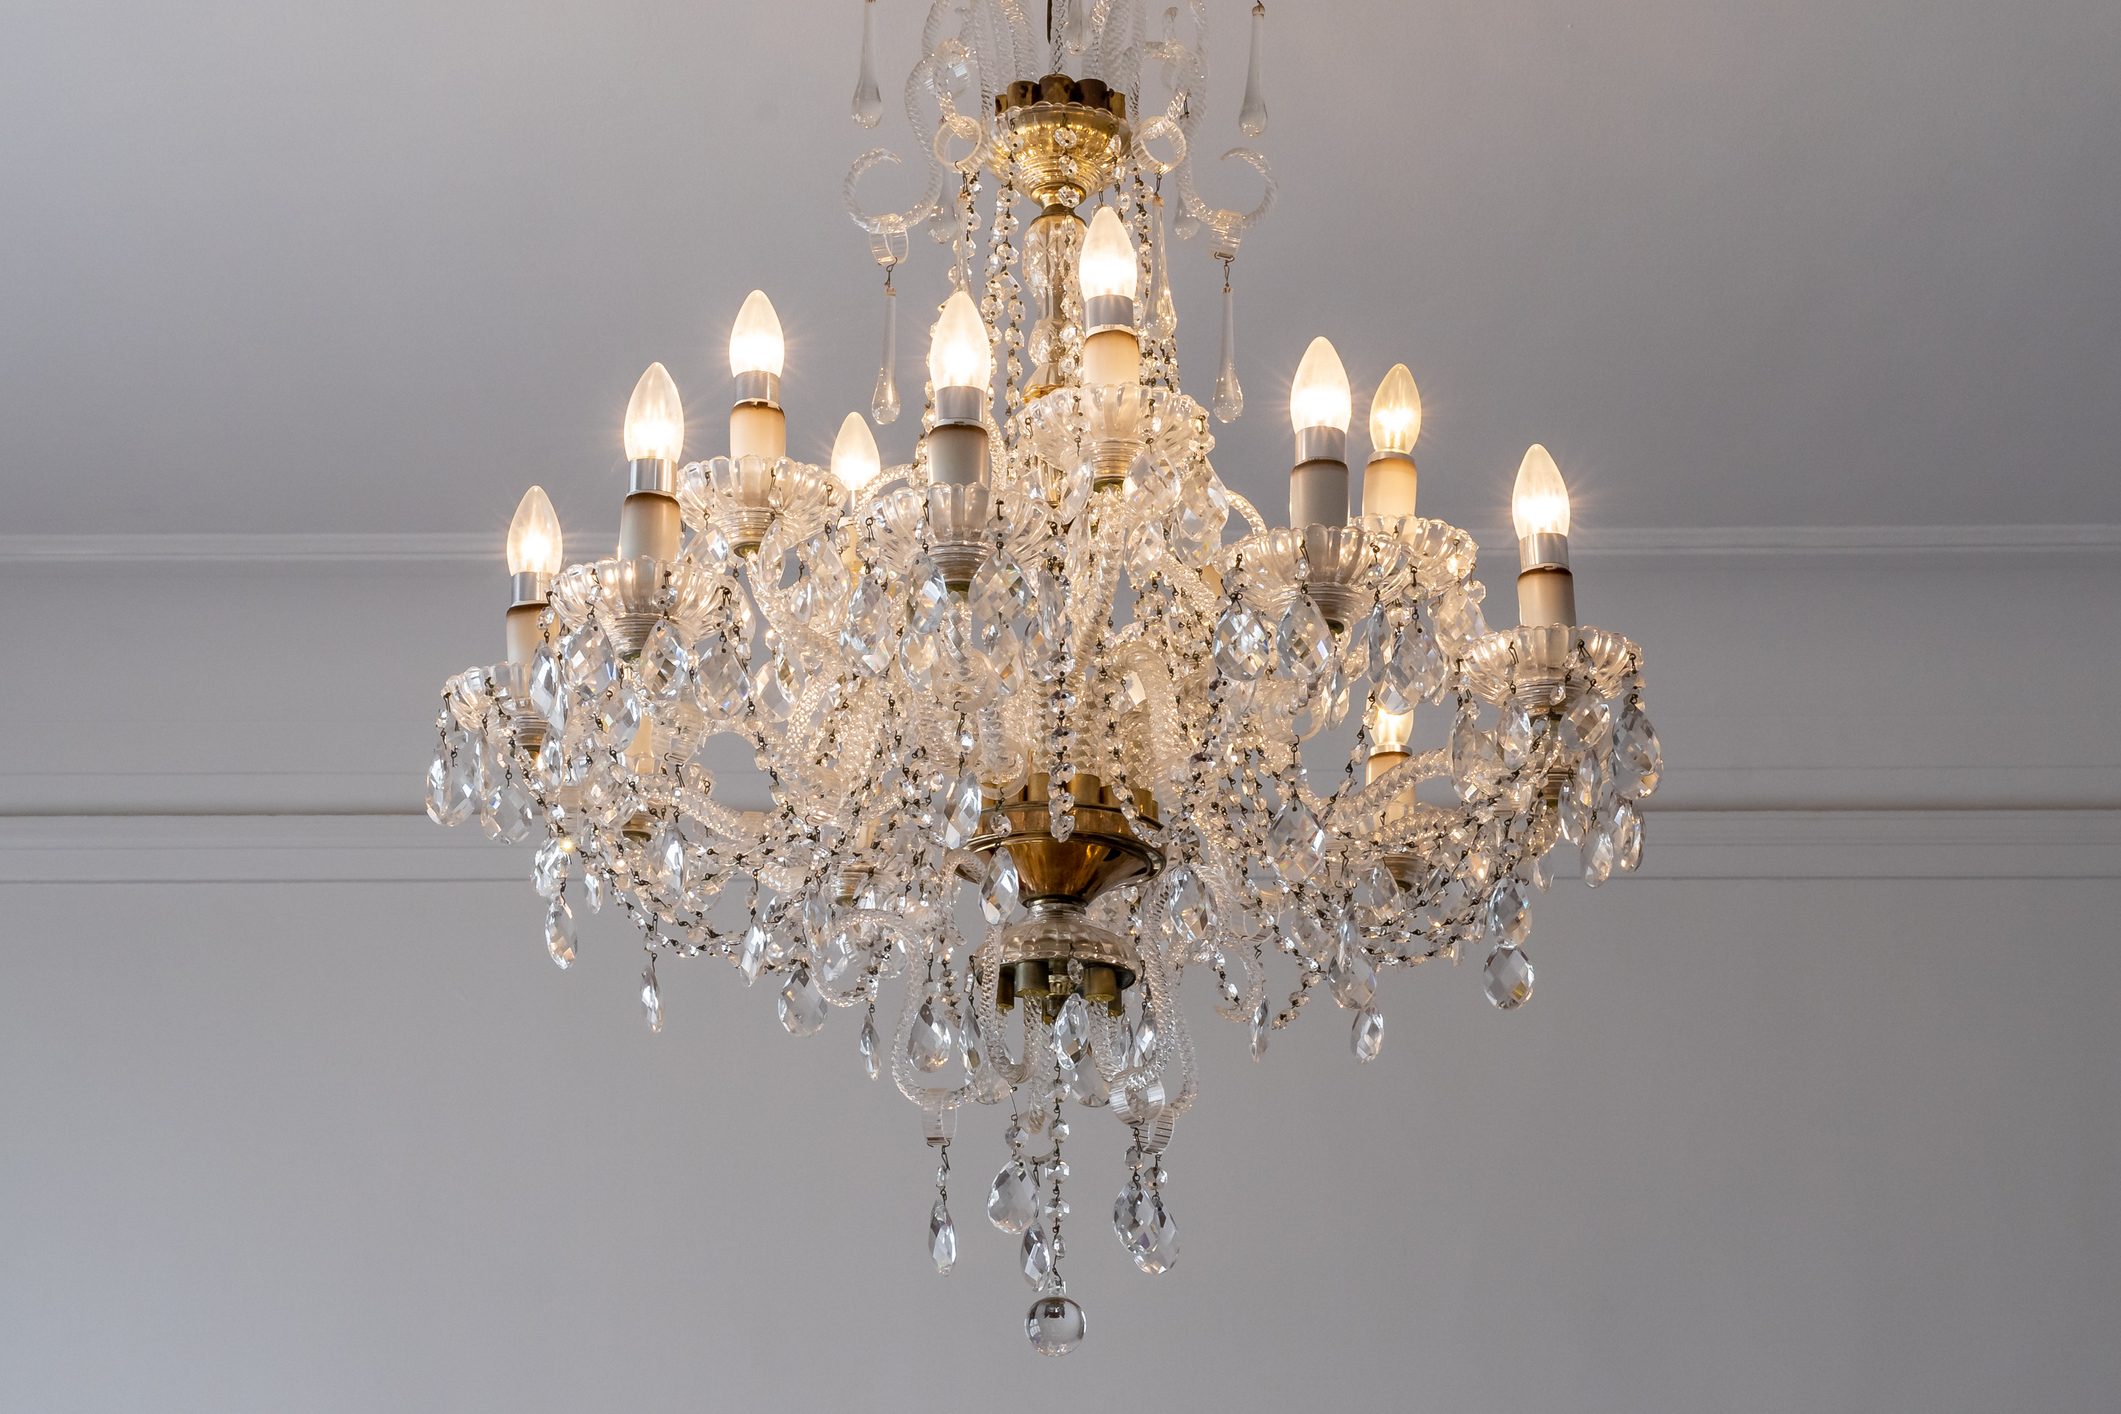 Low Angle View Of Illuminated Chandelier Hanging From Ceiling